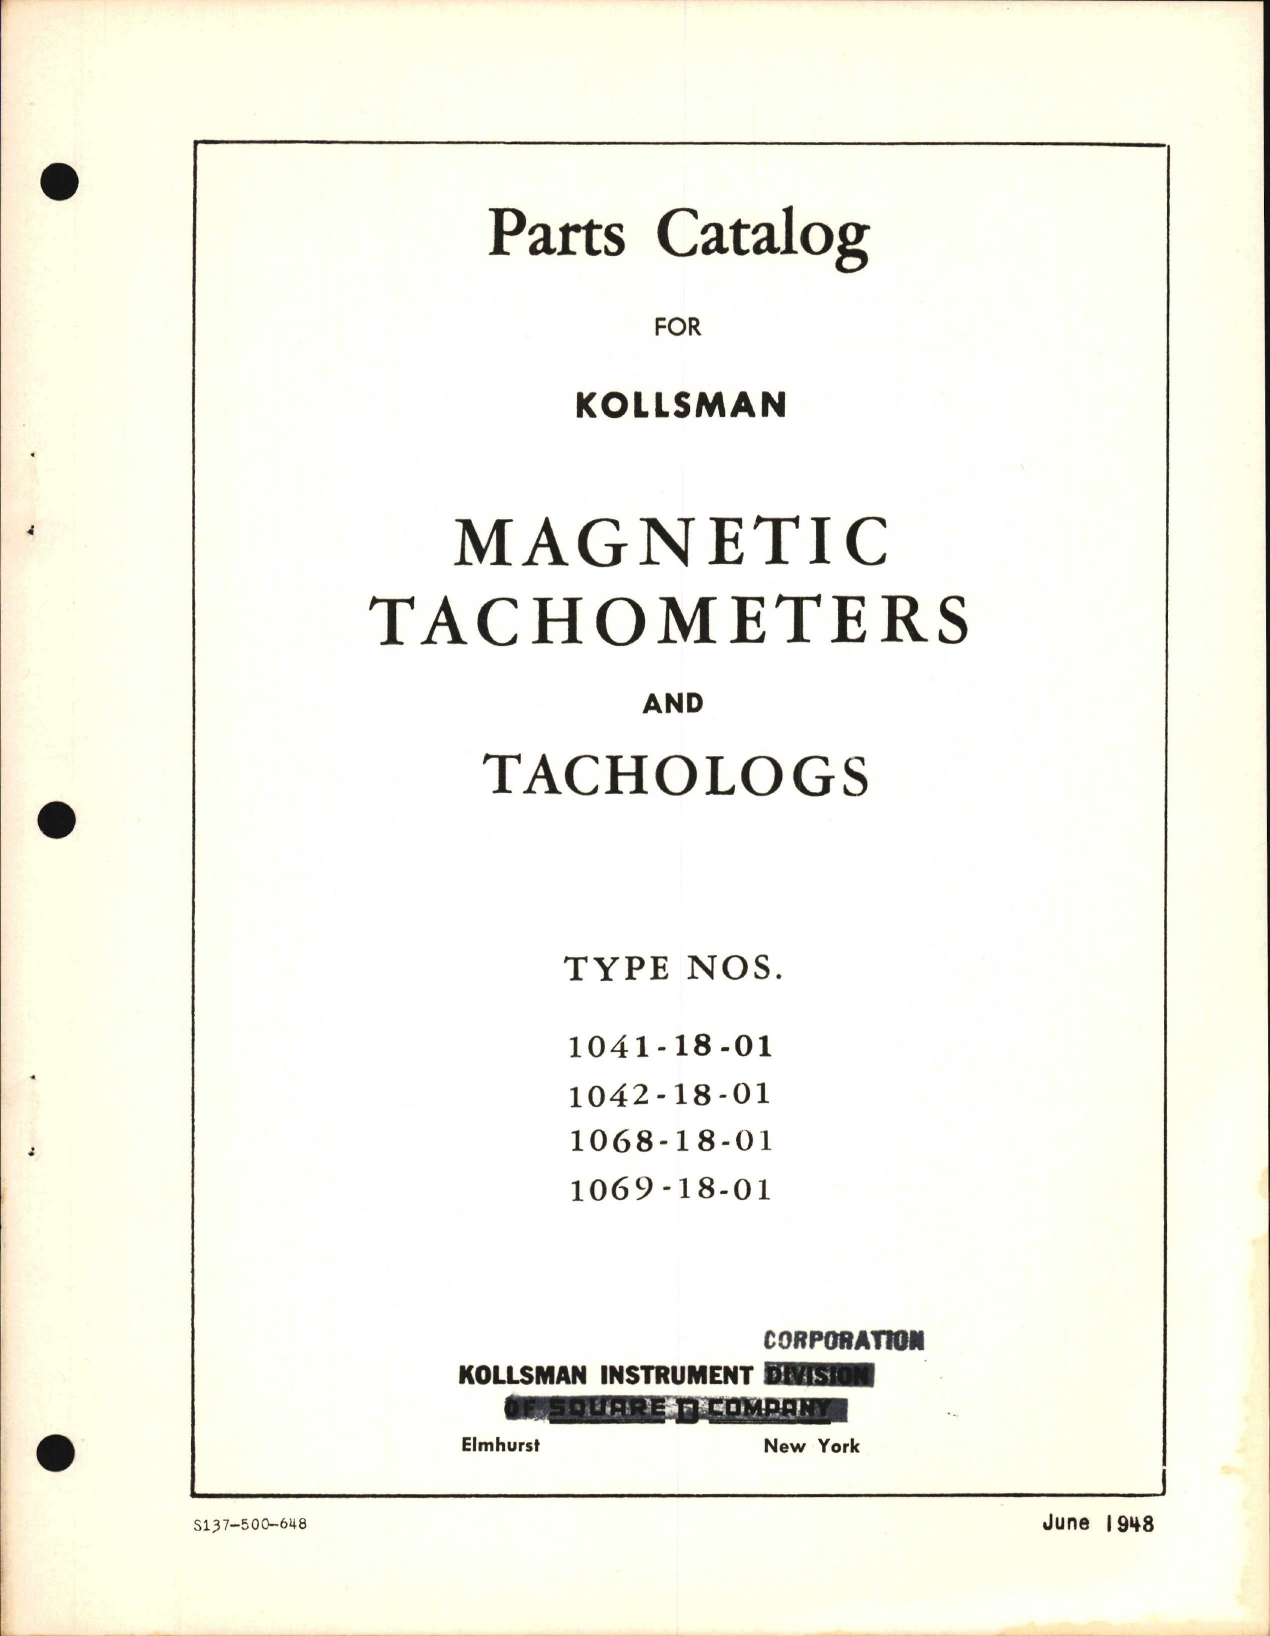 Sample page 1 from AirCorps Library document: Parts Catalog for Kollsman Magnetic Tachometers and Tachologs